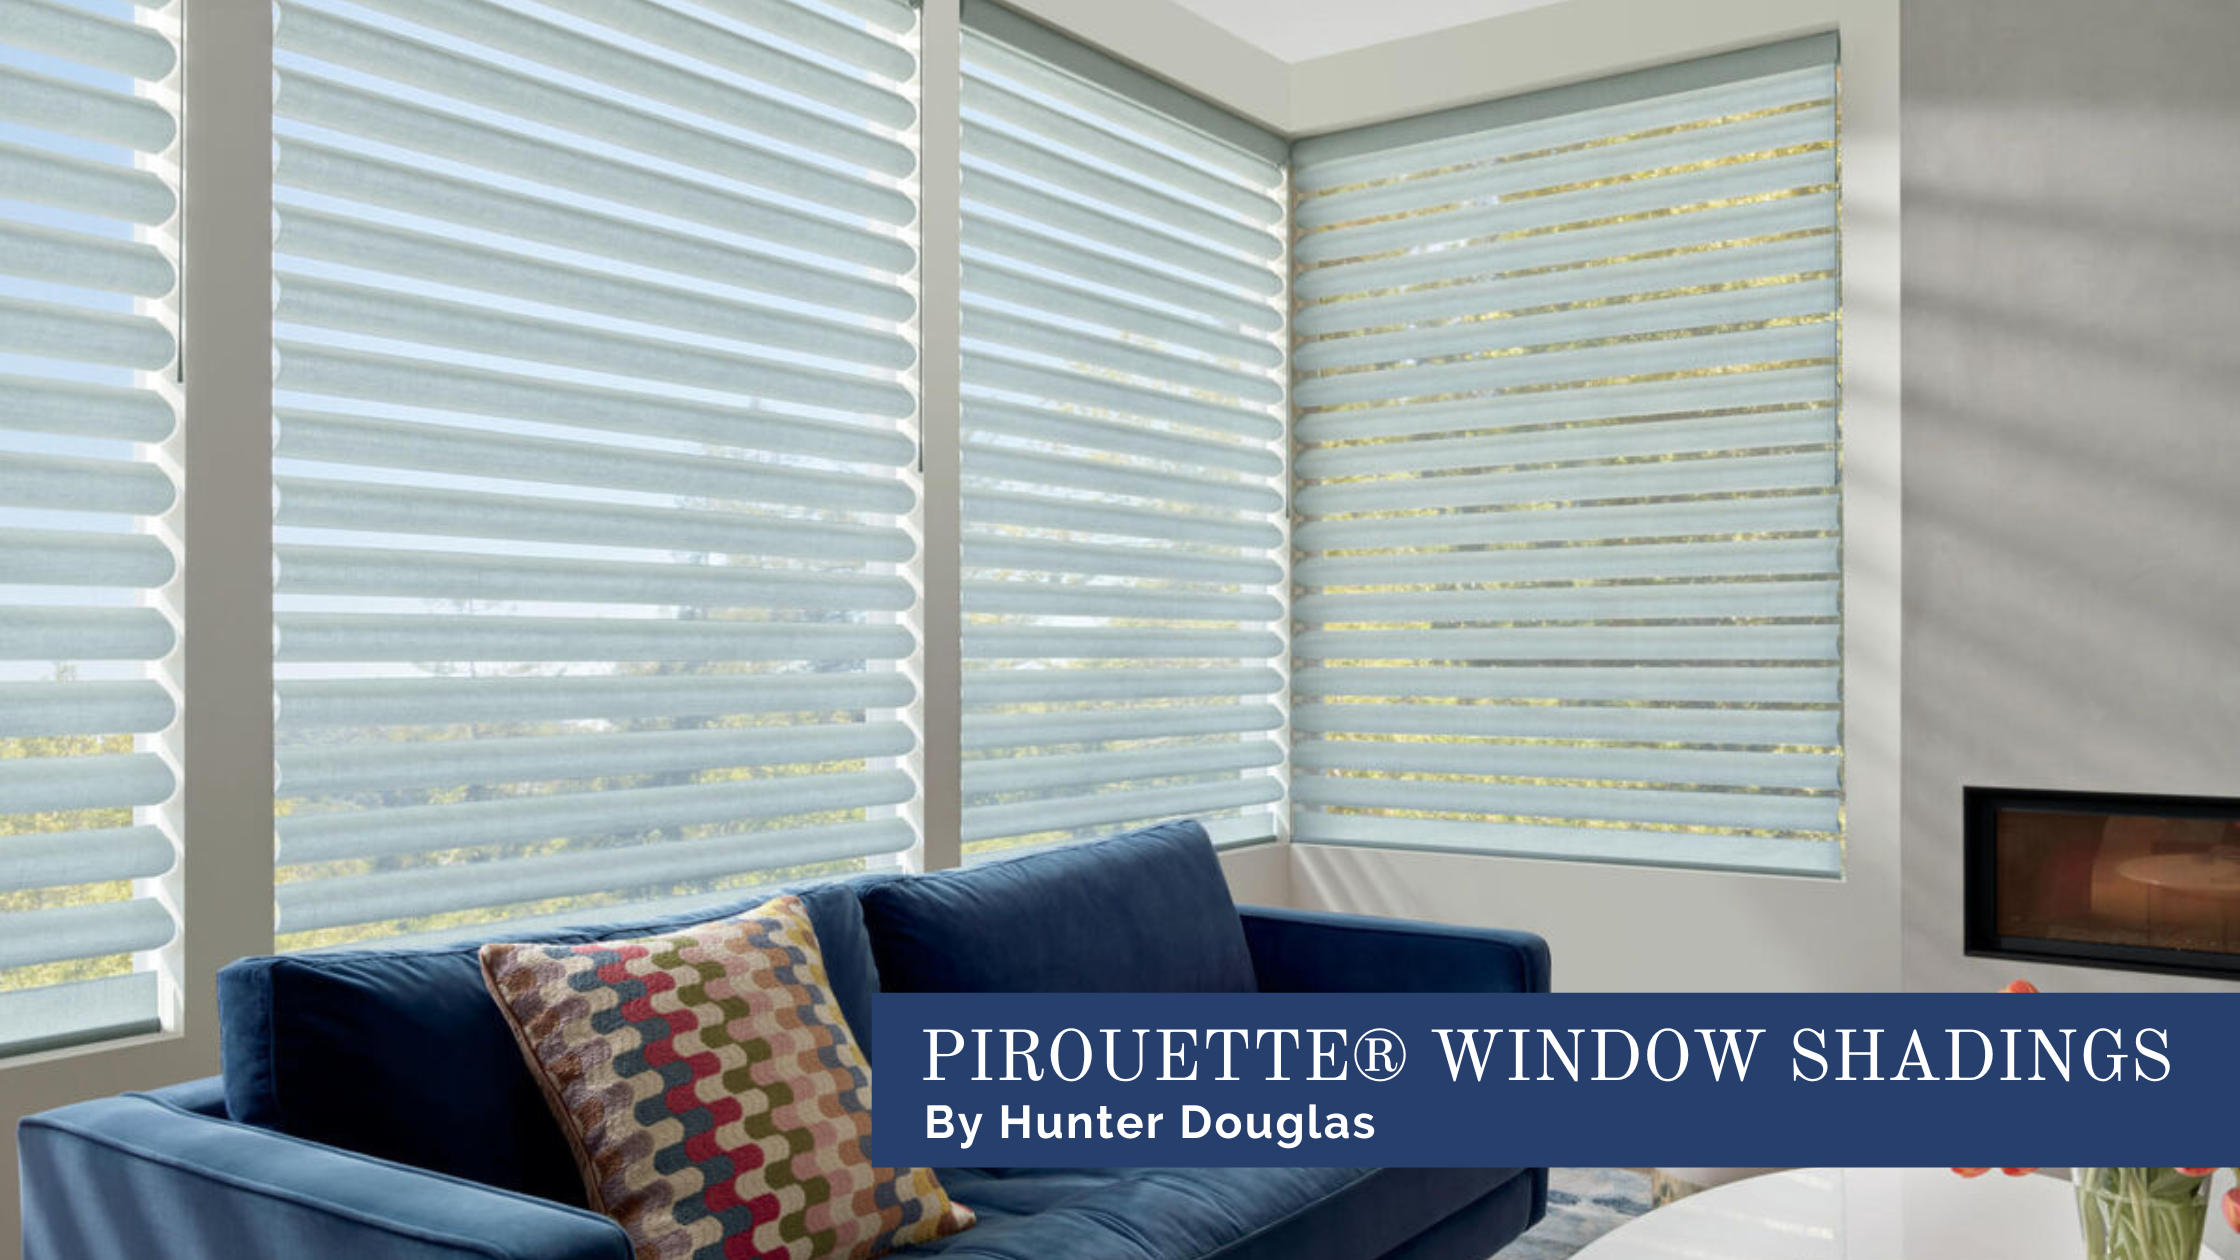 Hunter Douglas Pirouette® shades, summer style 2022 from JC Licht near Chicago, Illinois (IL) and midwest